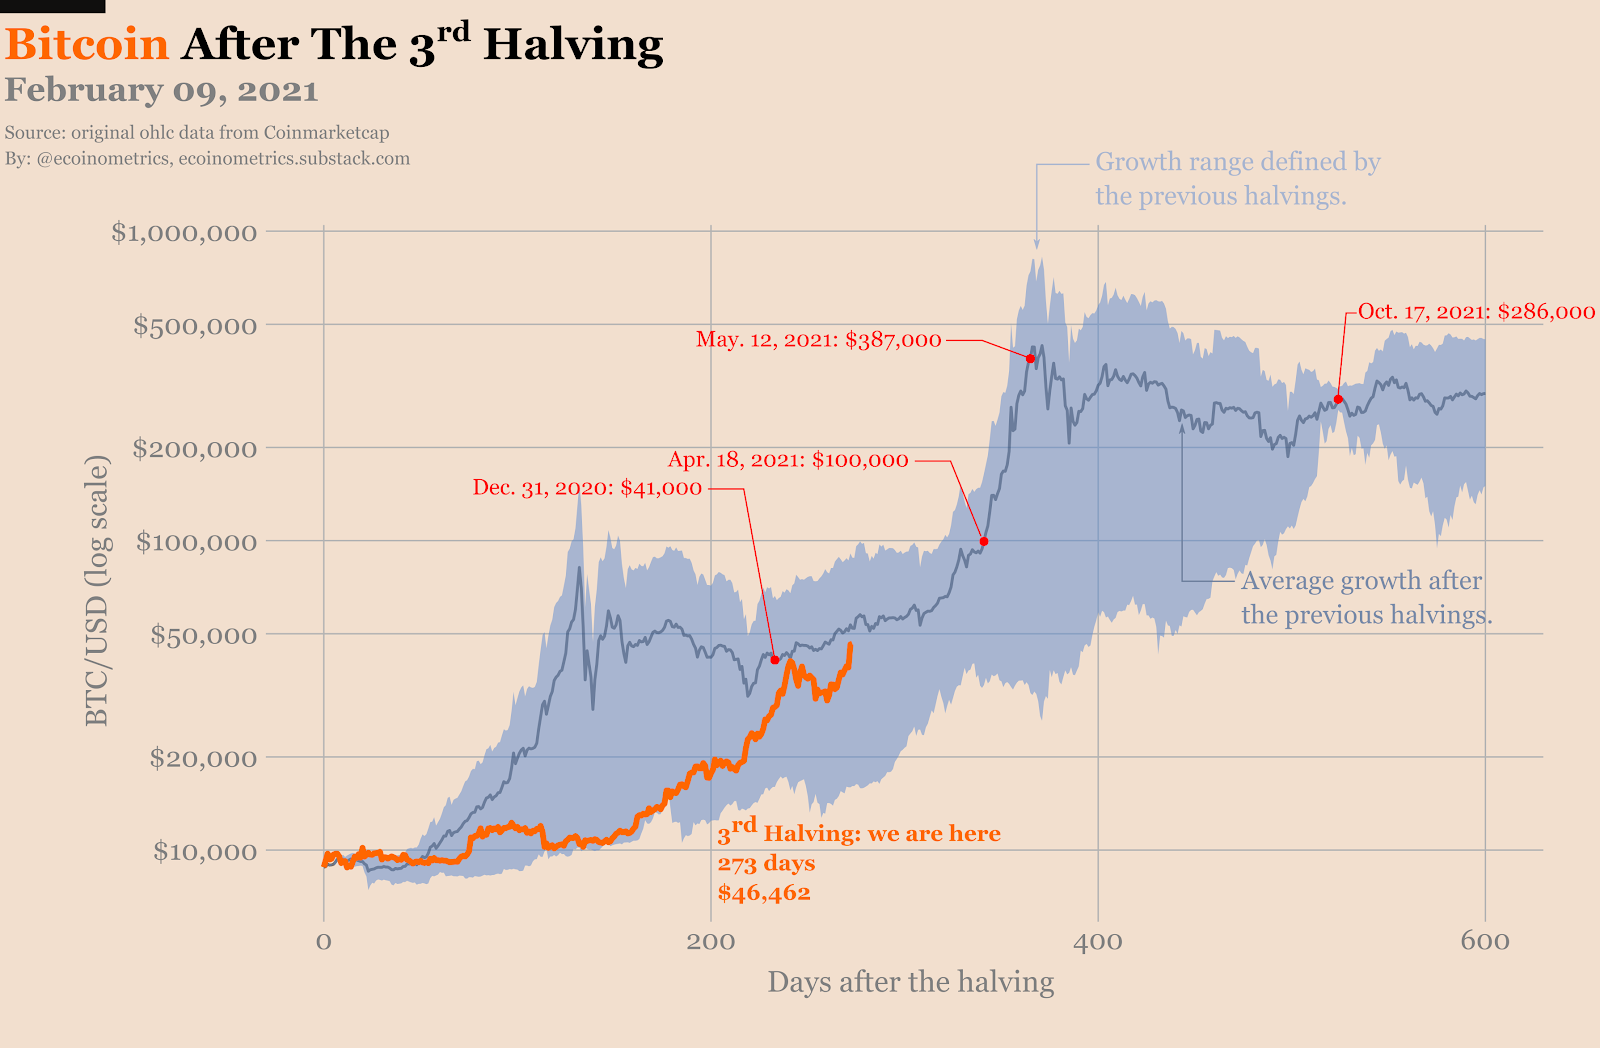 Bitcoin after 3rd halving chart